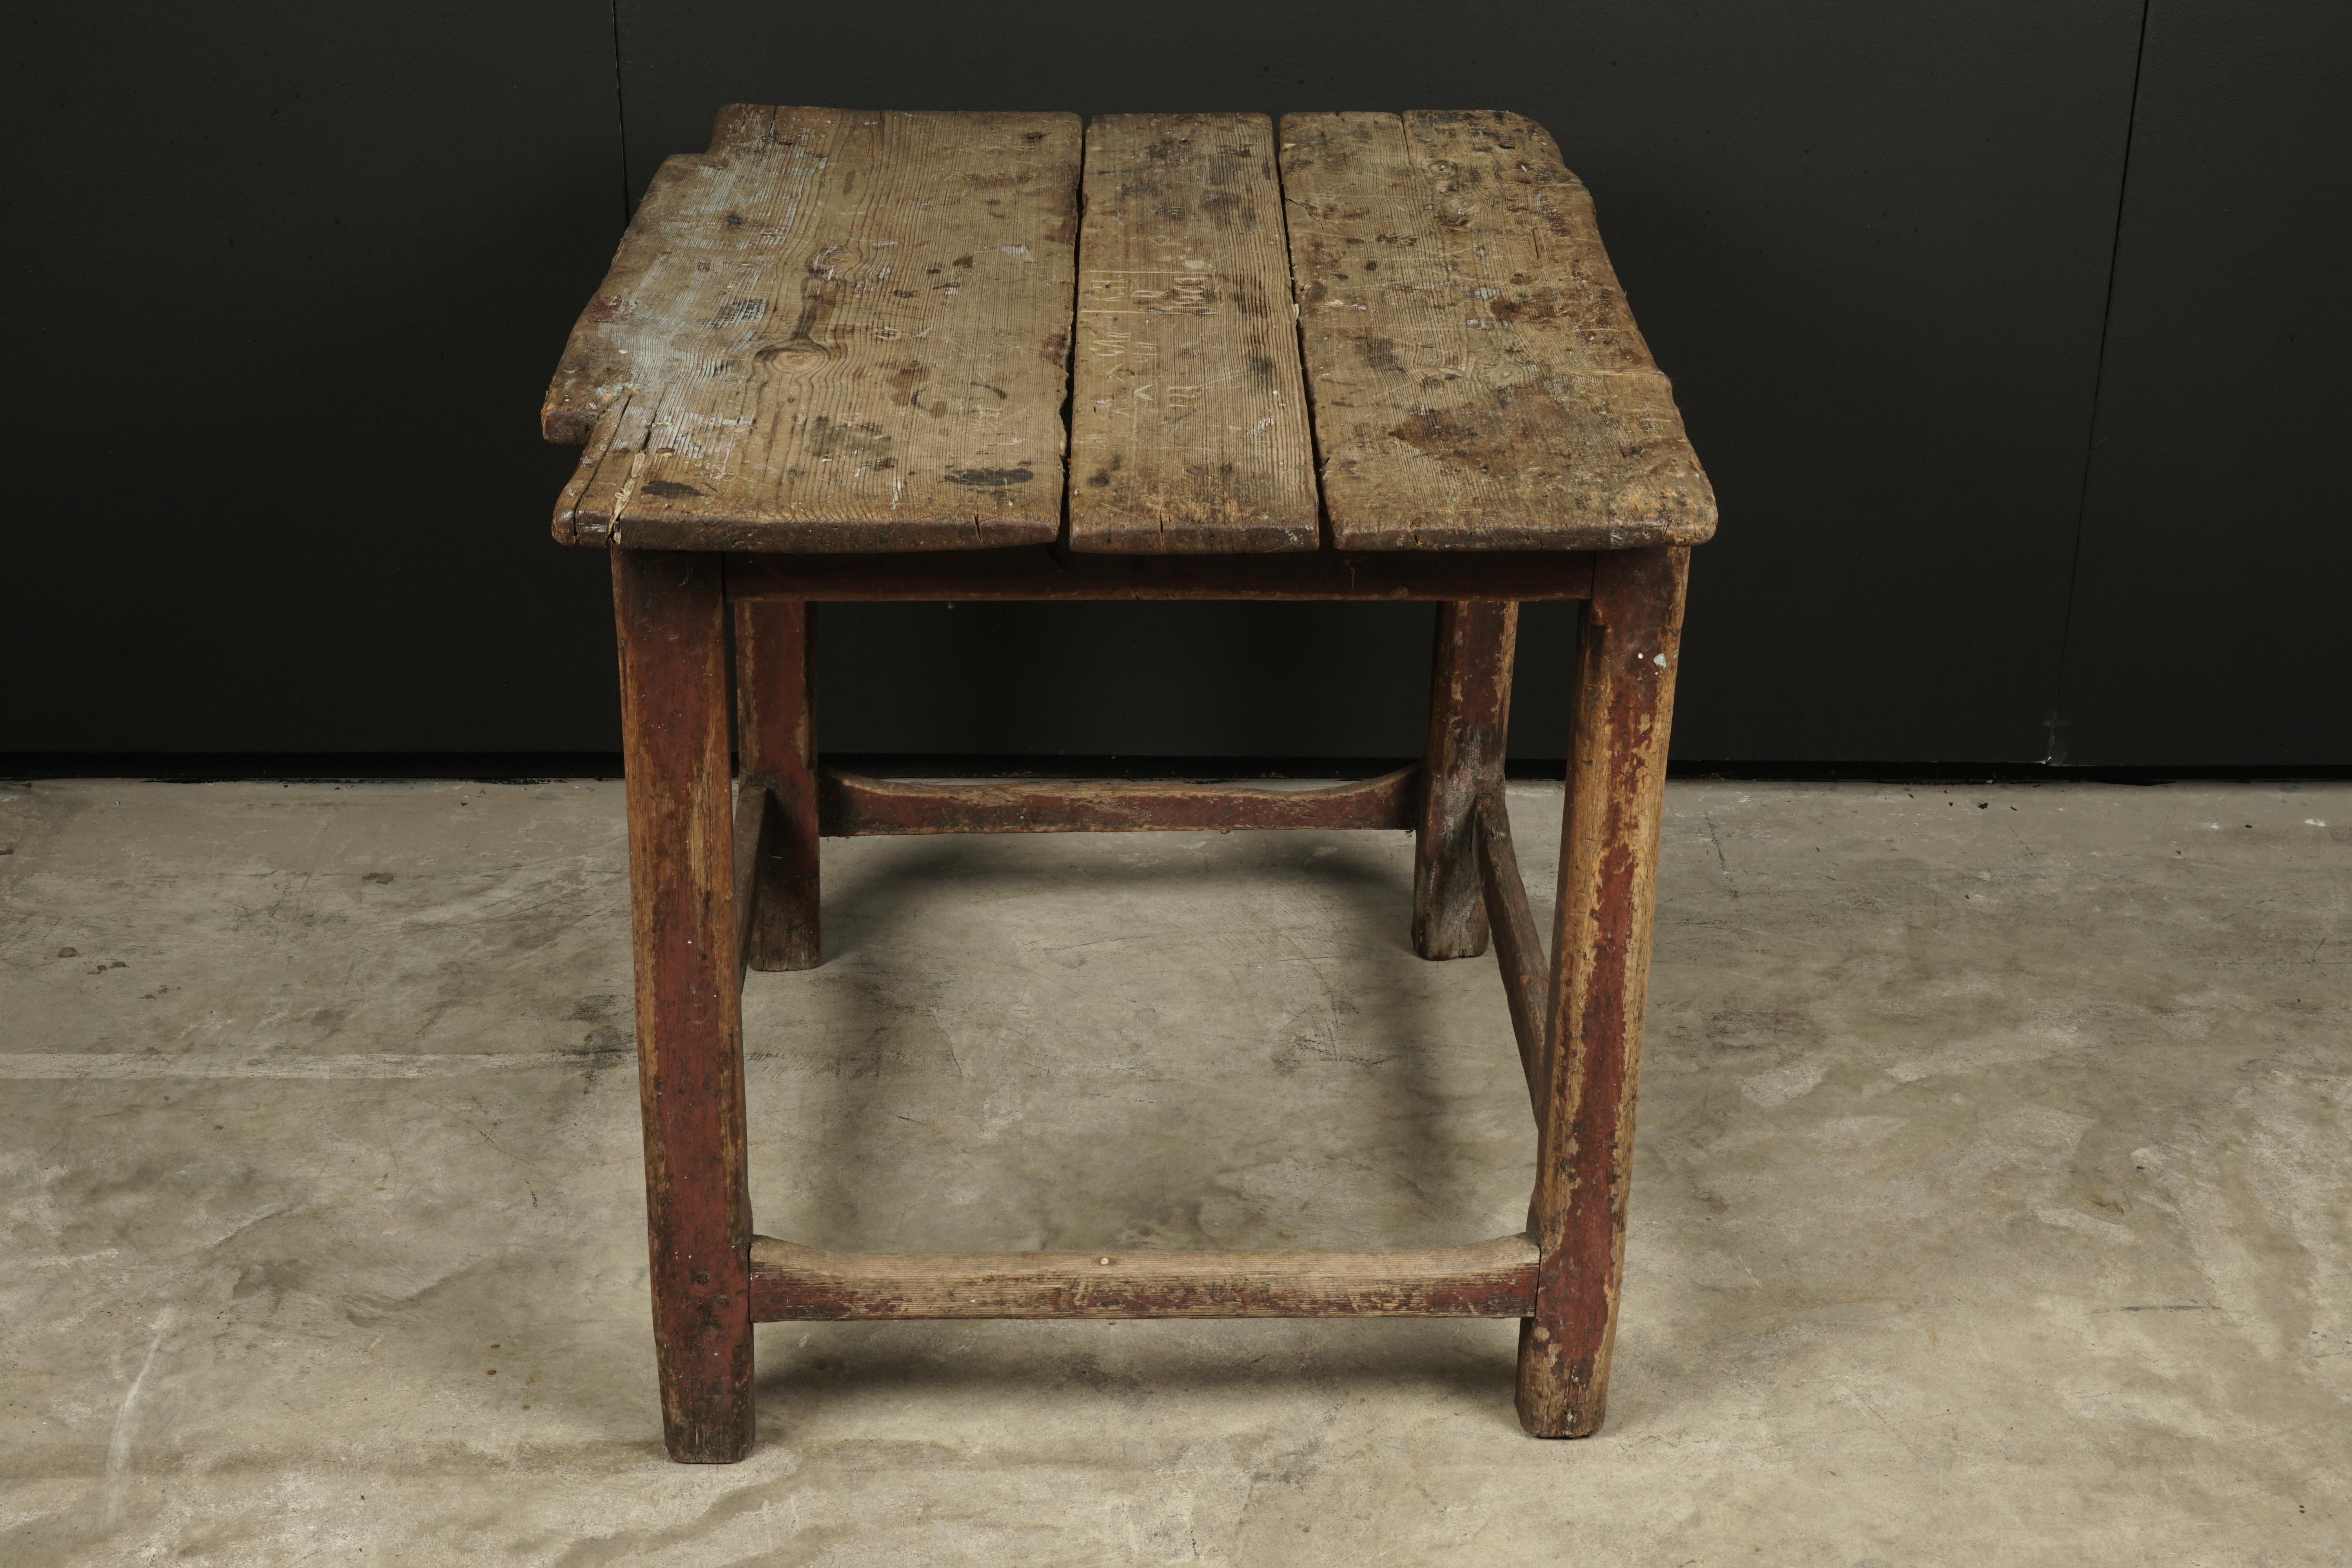 European Early Primitive Table from Sweden, circa 1850